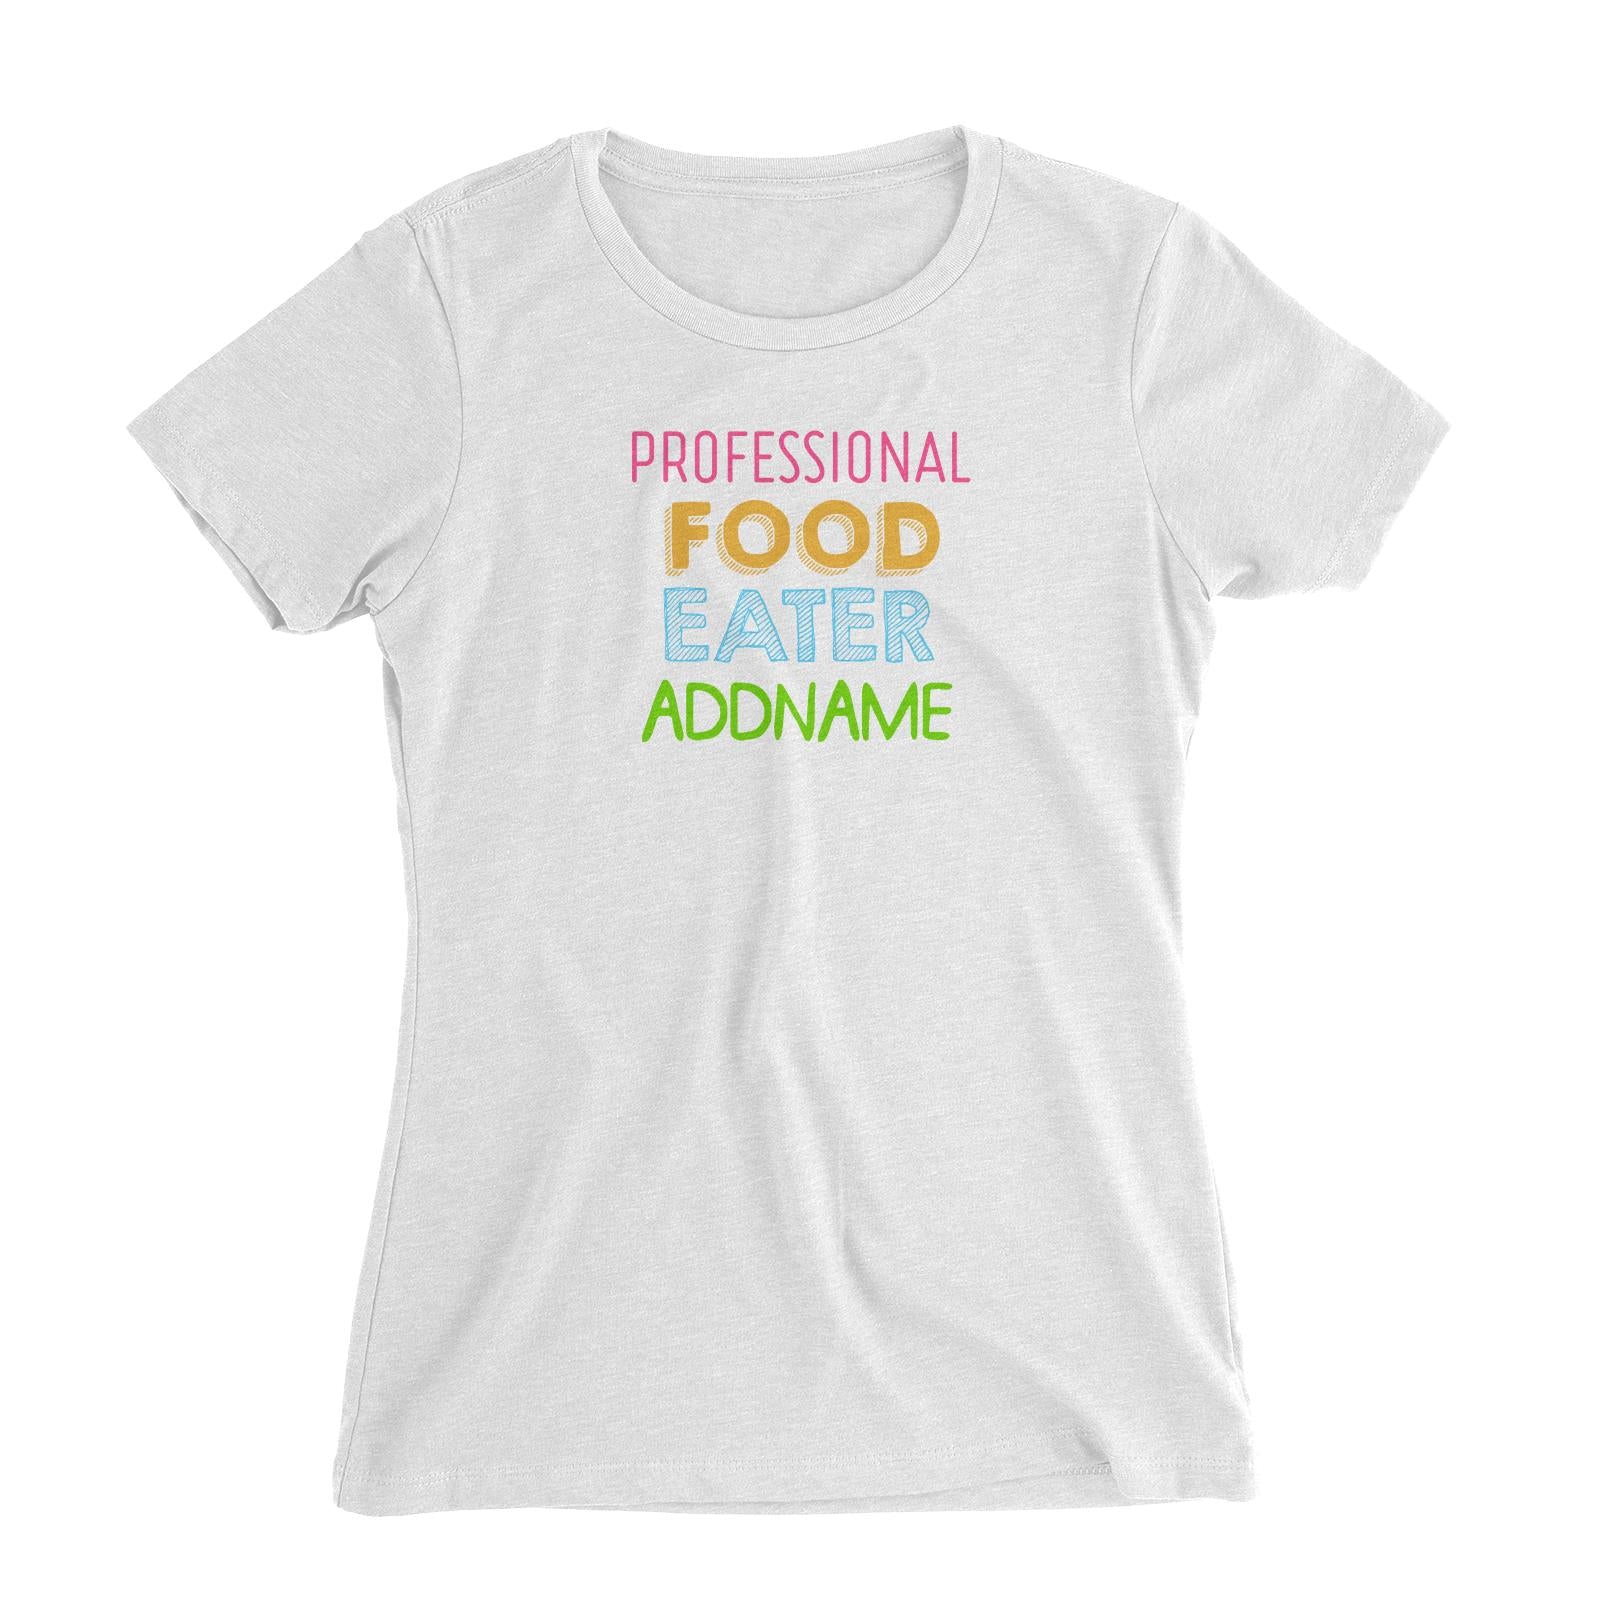 Professional Food Eater Addname Women's Slim Fit T-Shirt